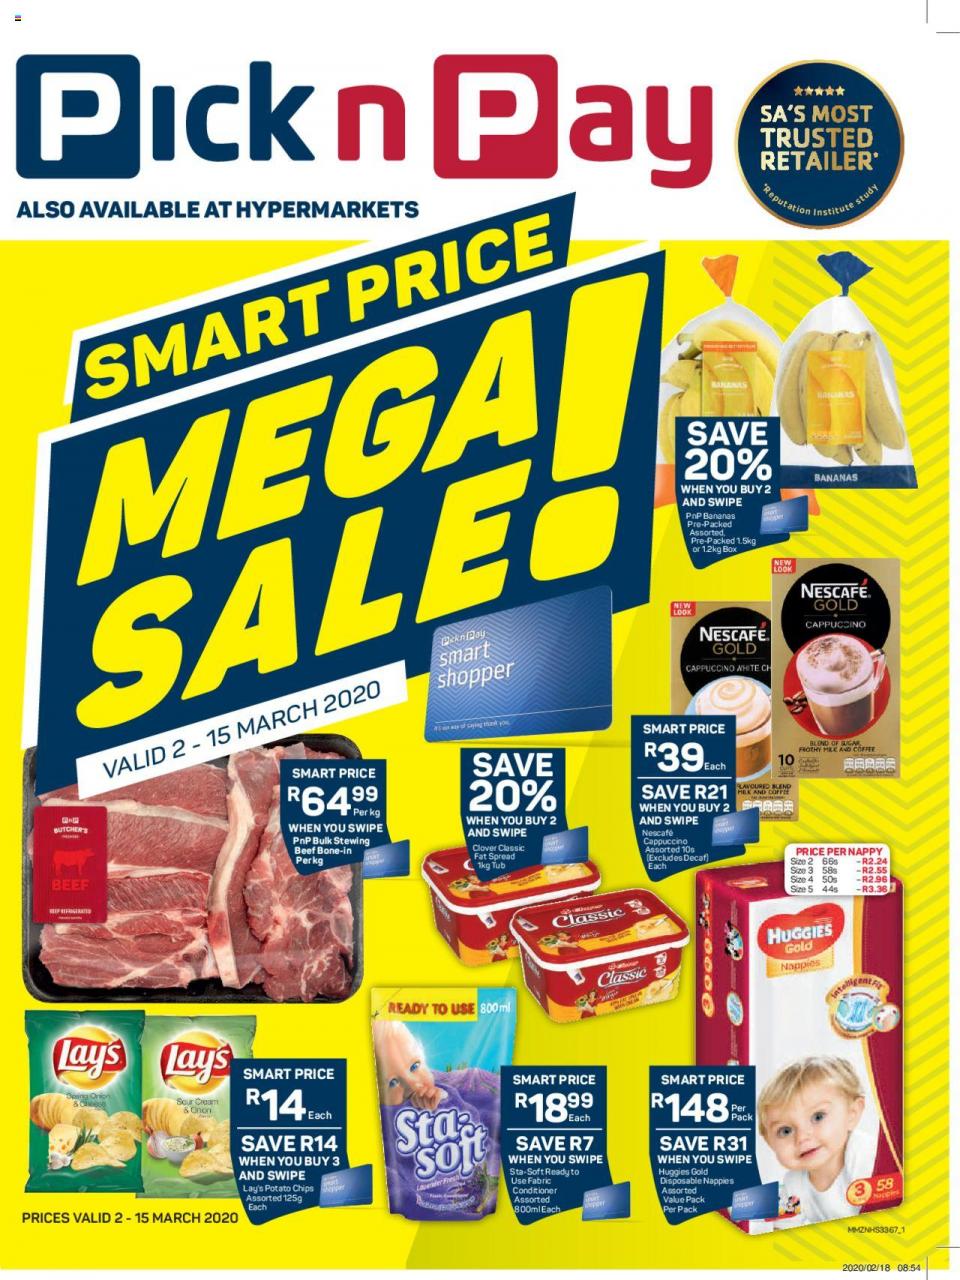 Pick n Pay Specials Smart Price Mega Sale 2 March 2020